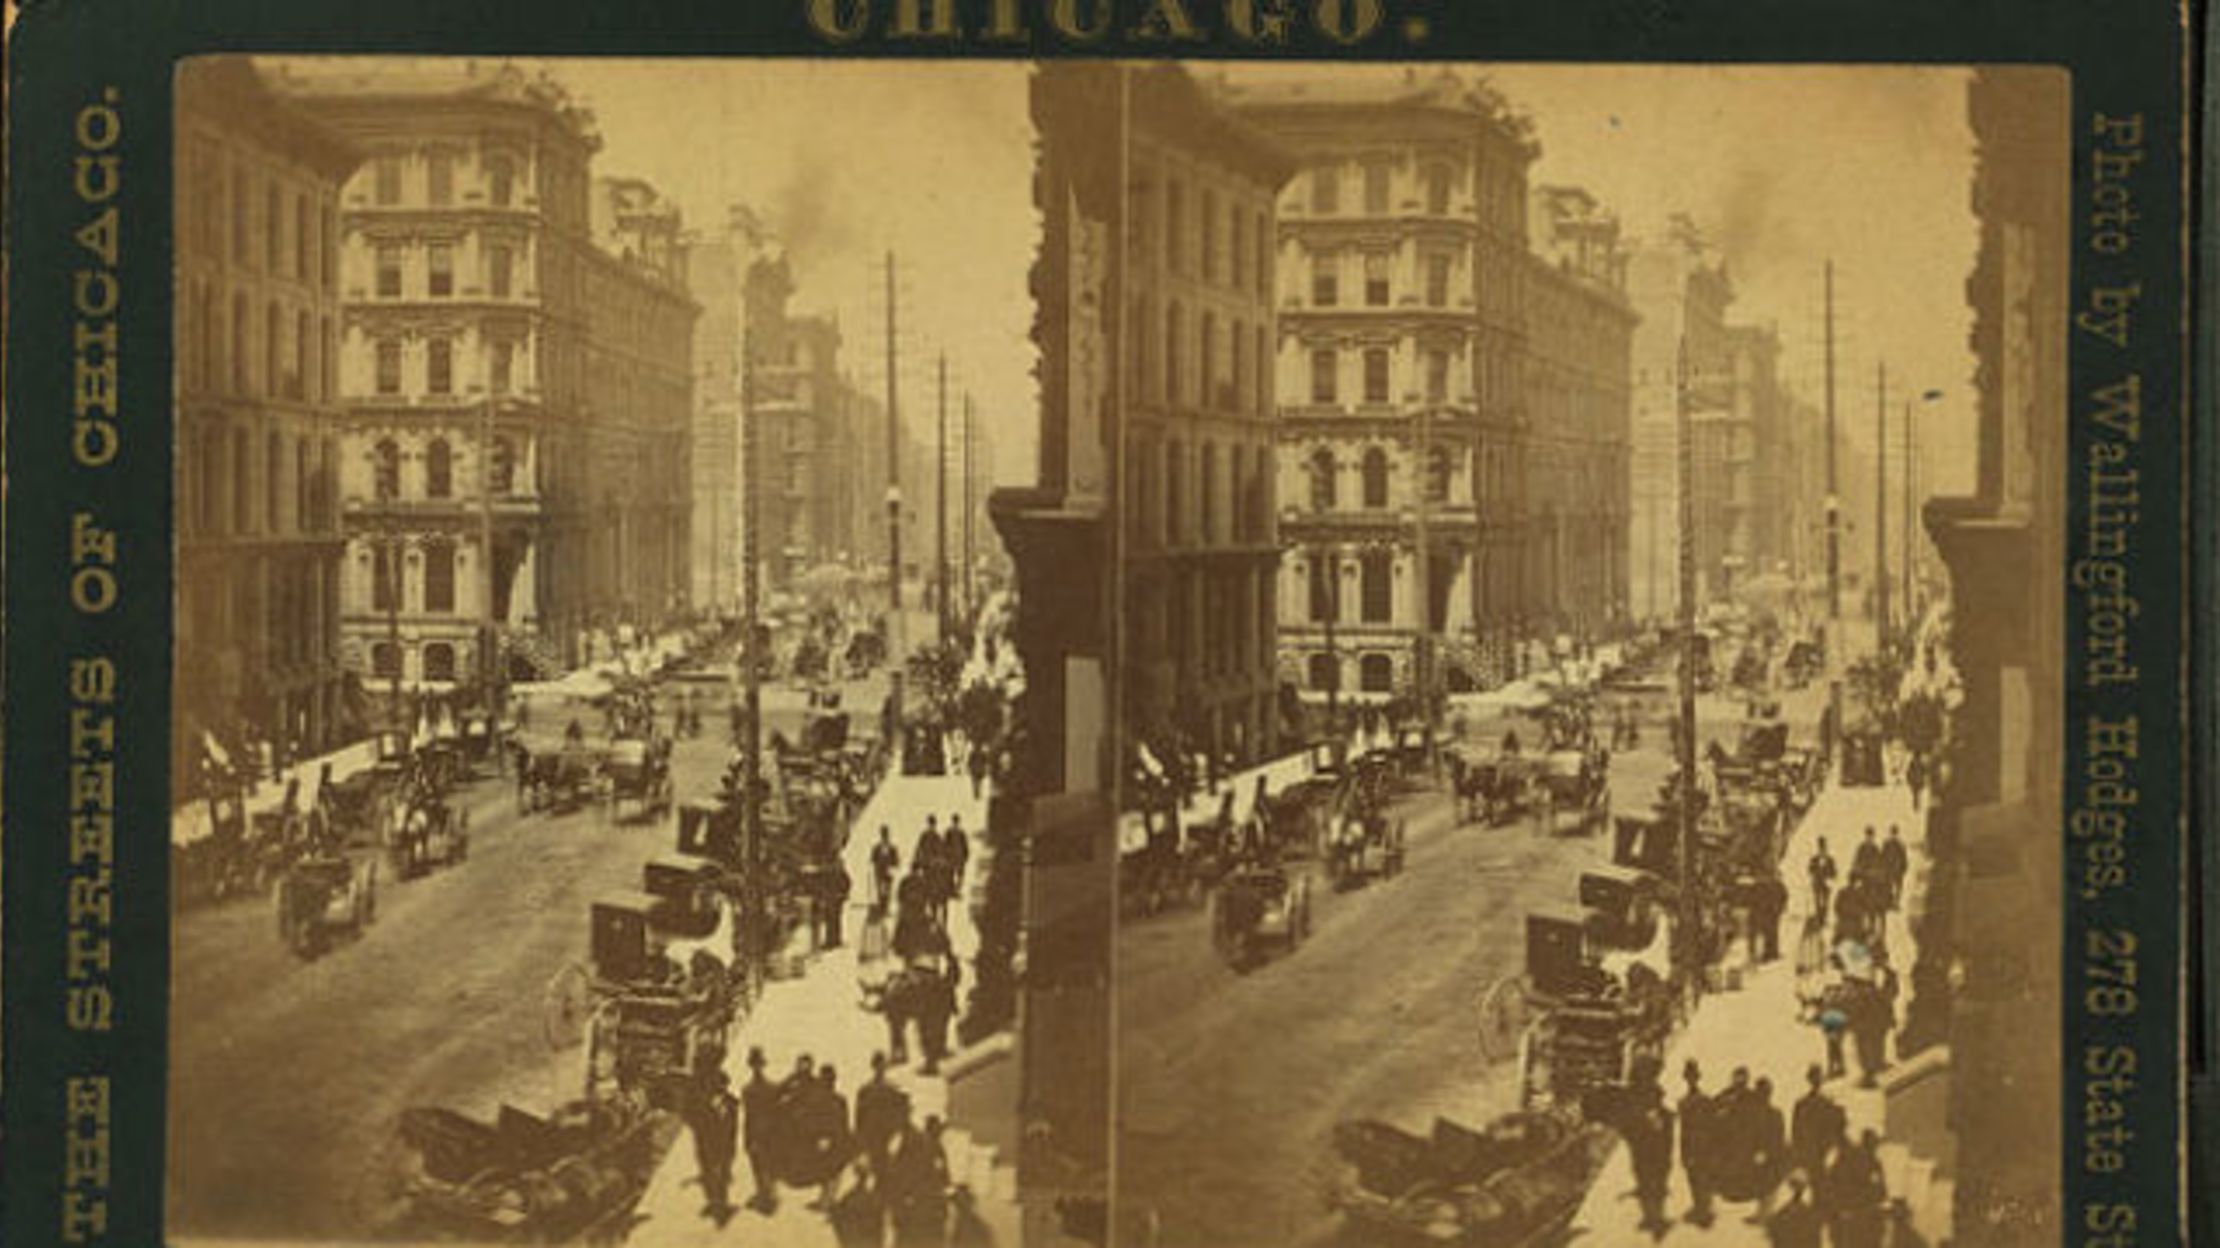 7 Cautions for Chicago Tourists From an 1888 Visitor Guide | Mental Floss